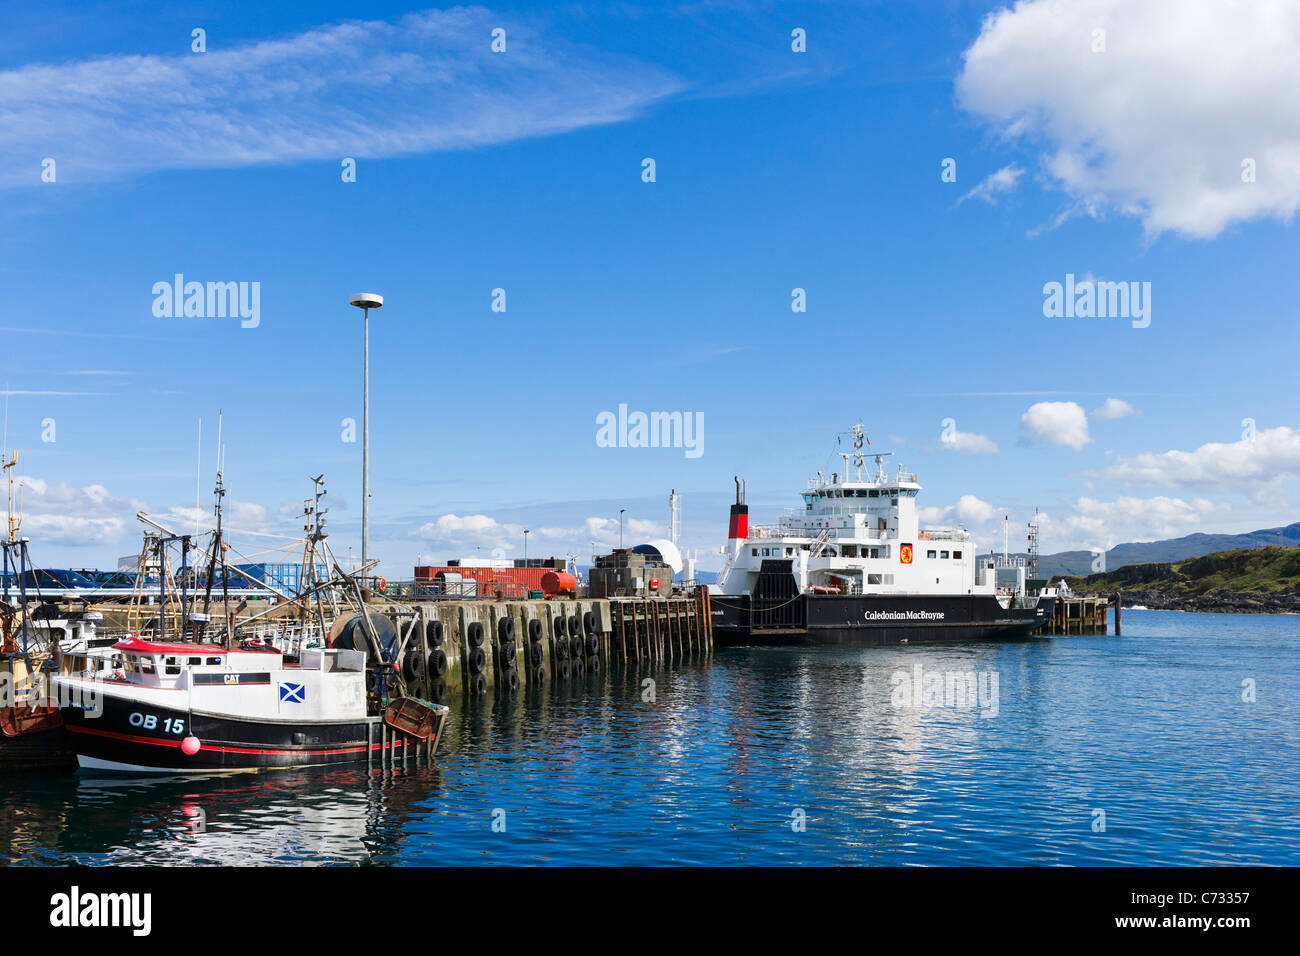 Harbour at Mallaig with the Caledonian MacBrayne ferry at the end of the jetty, Lochabar, Highland, Scotland, UK Stock Photo